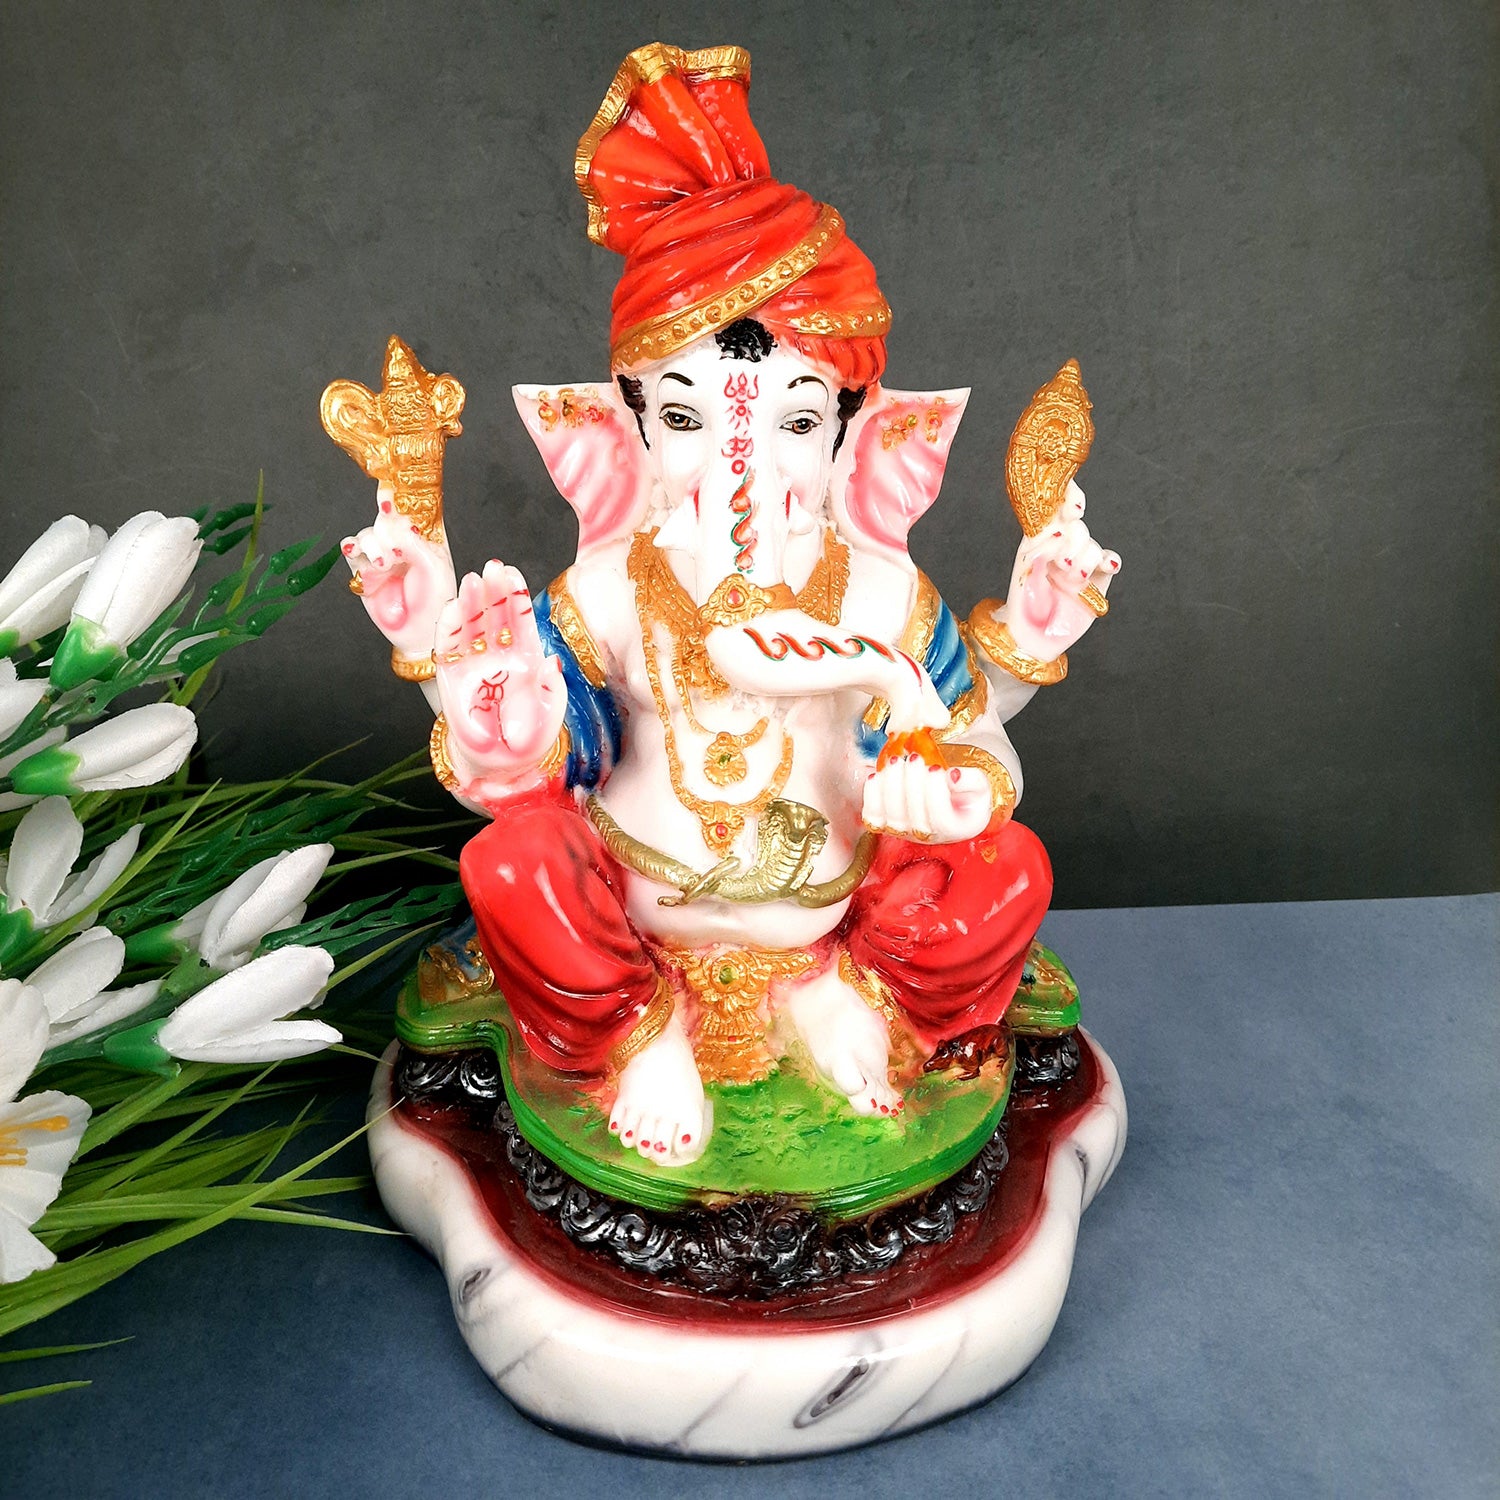 Buy SAUDEEP INDIA Ganesh Idol for Home Ganpati Ganesha Murti for Gift  Showpiece for Home Décor Mandir Office Desk Living Room(Model Flute 04)  Online at Low Prices in India - Amazon.in